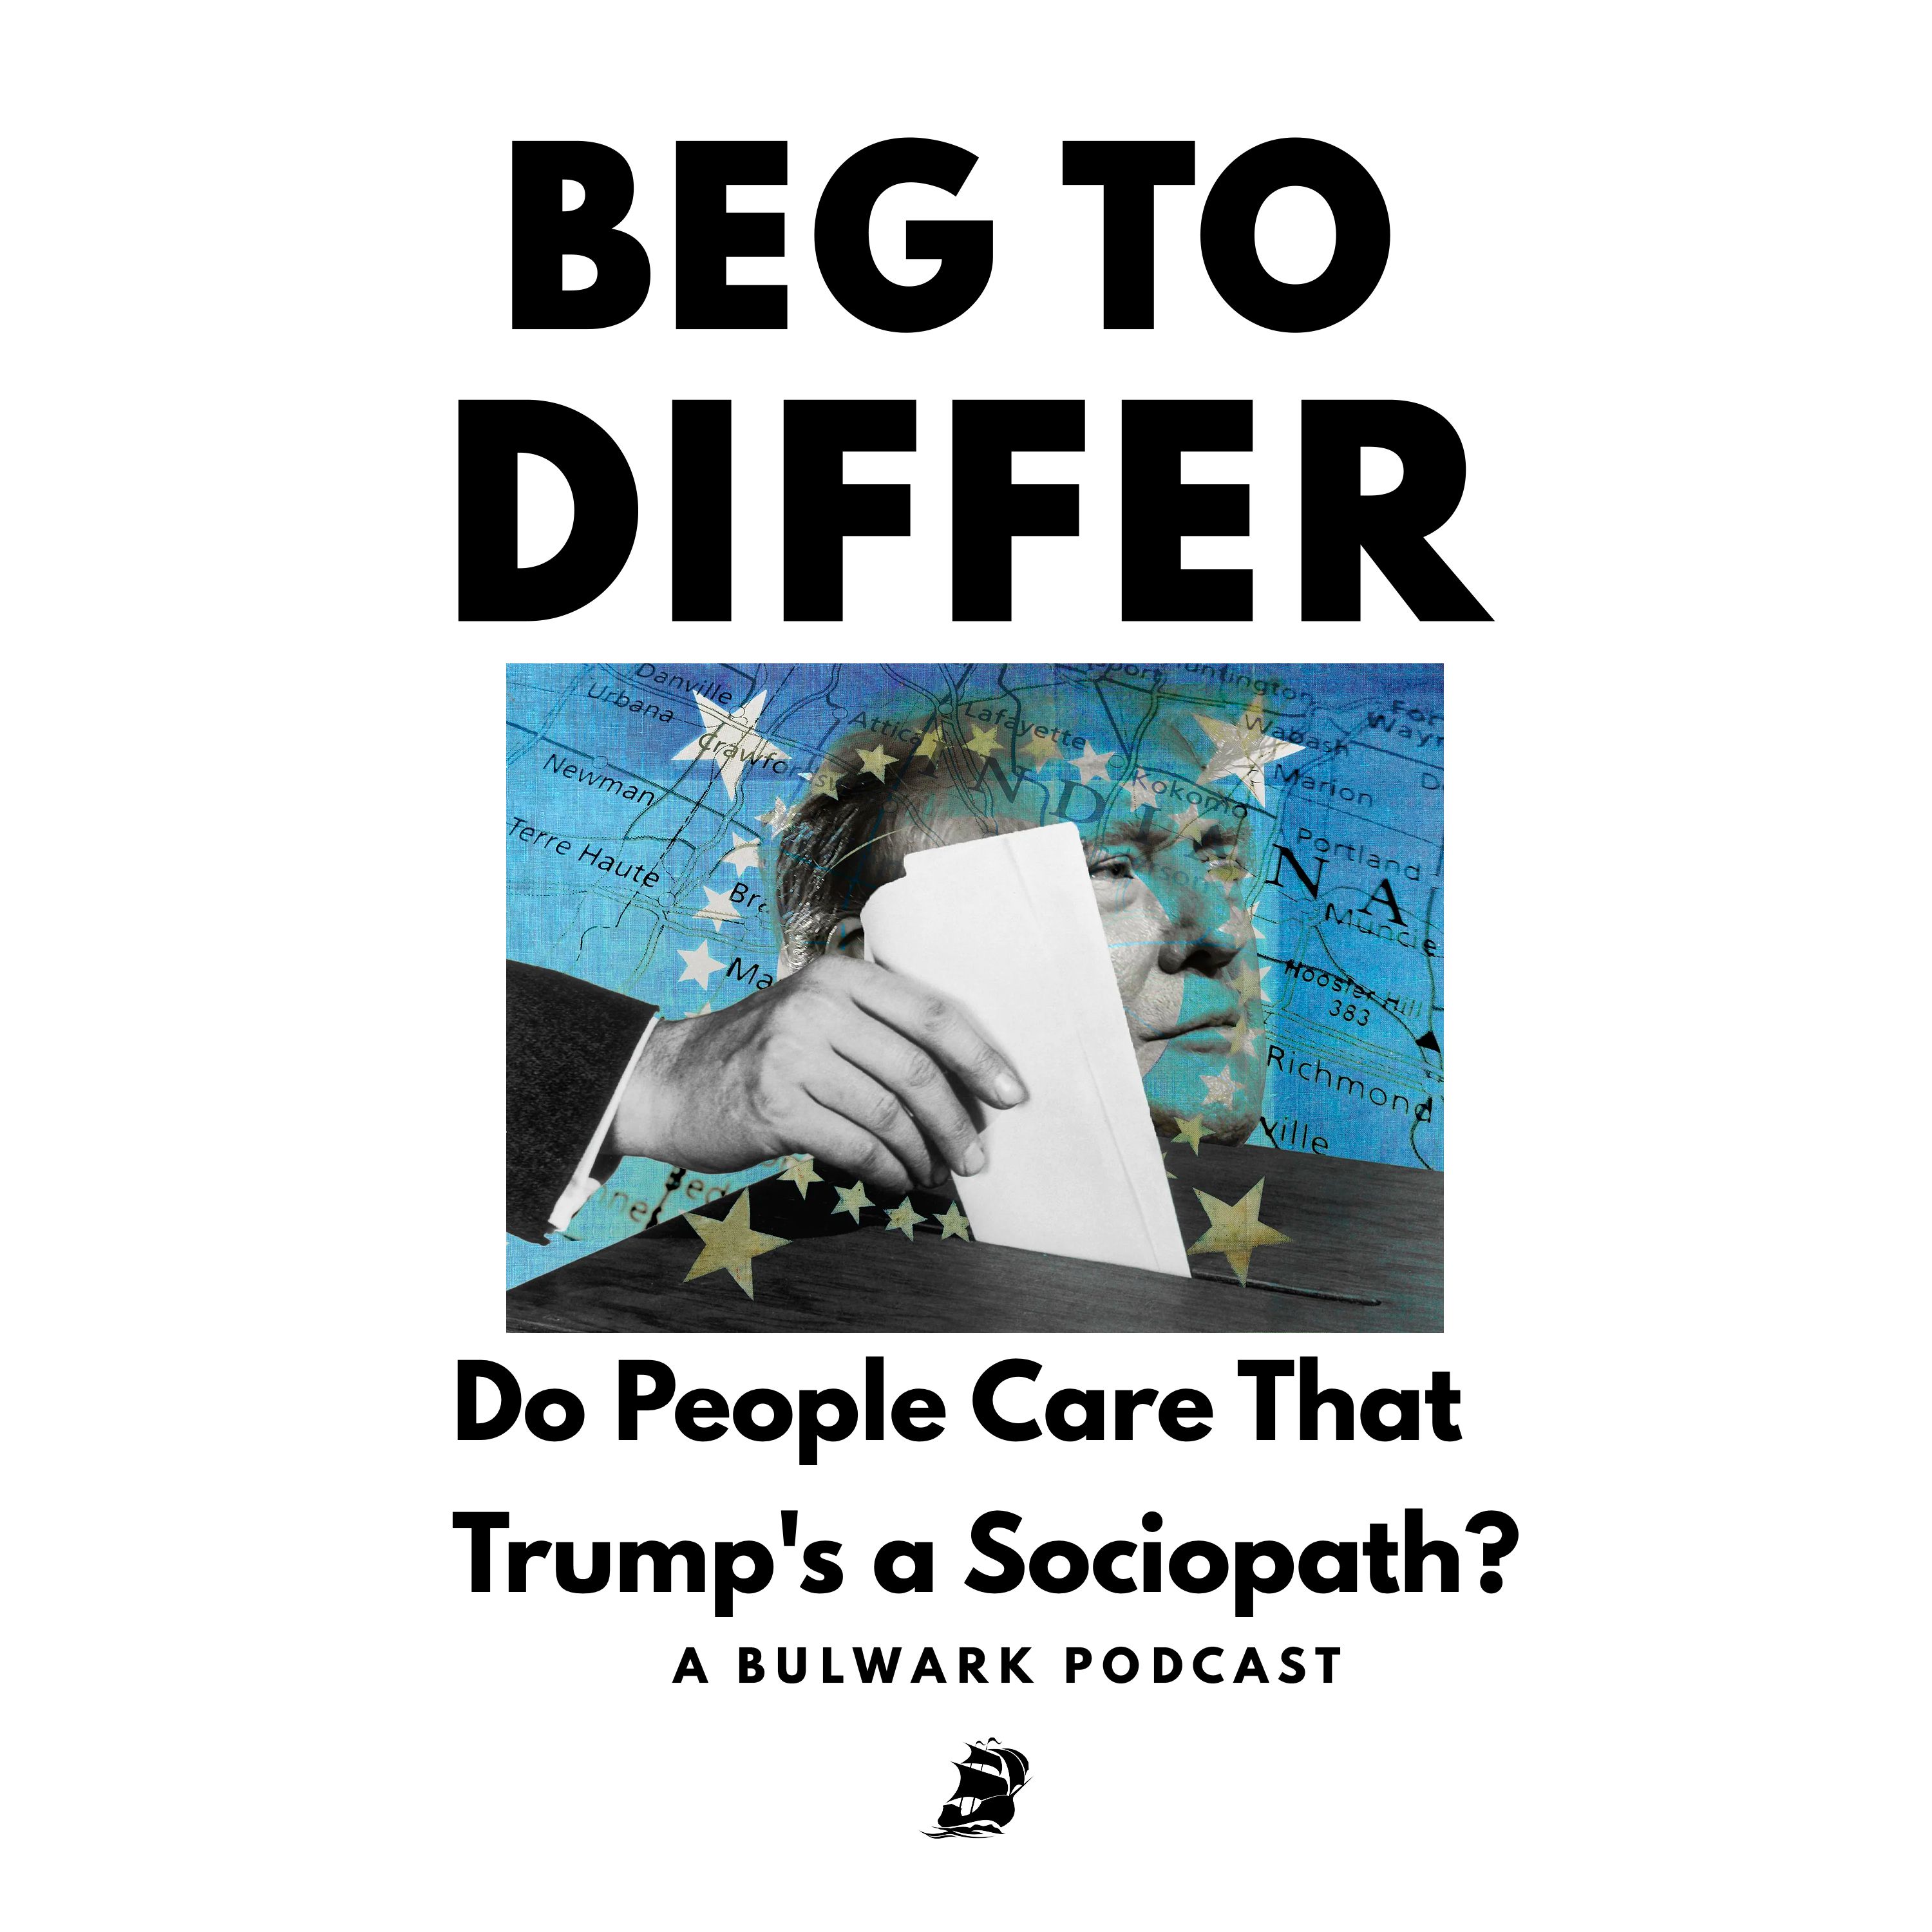 Do People Care That Trump’s a Sociopath?